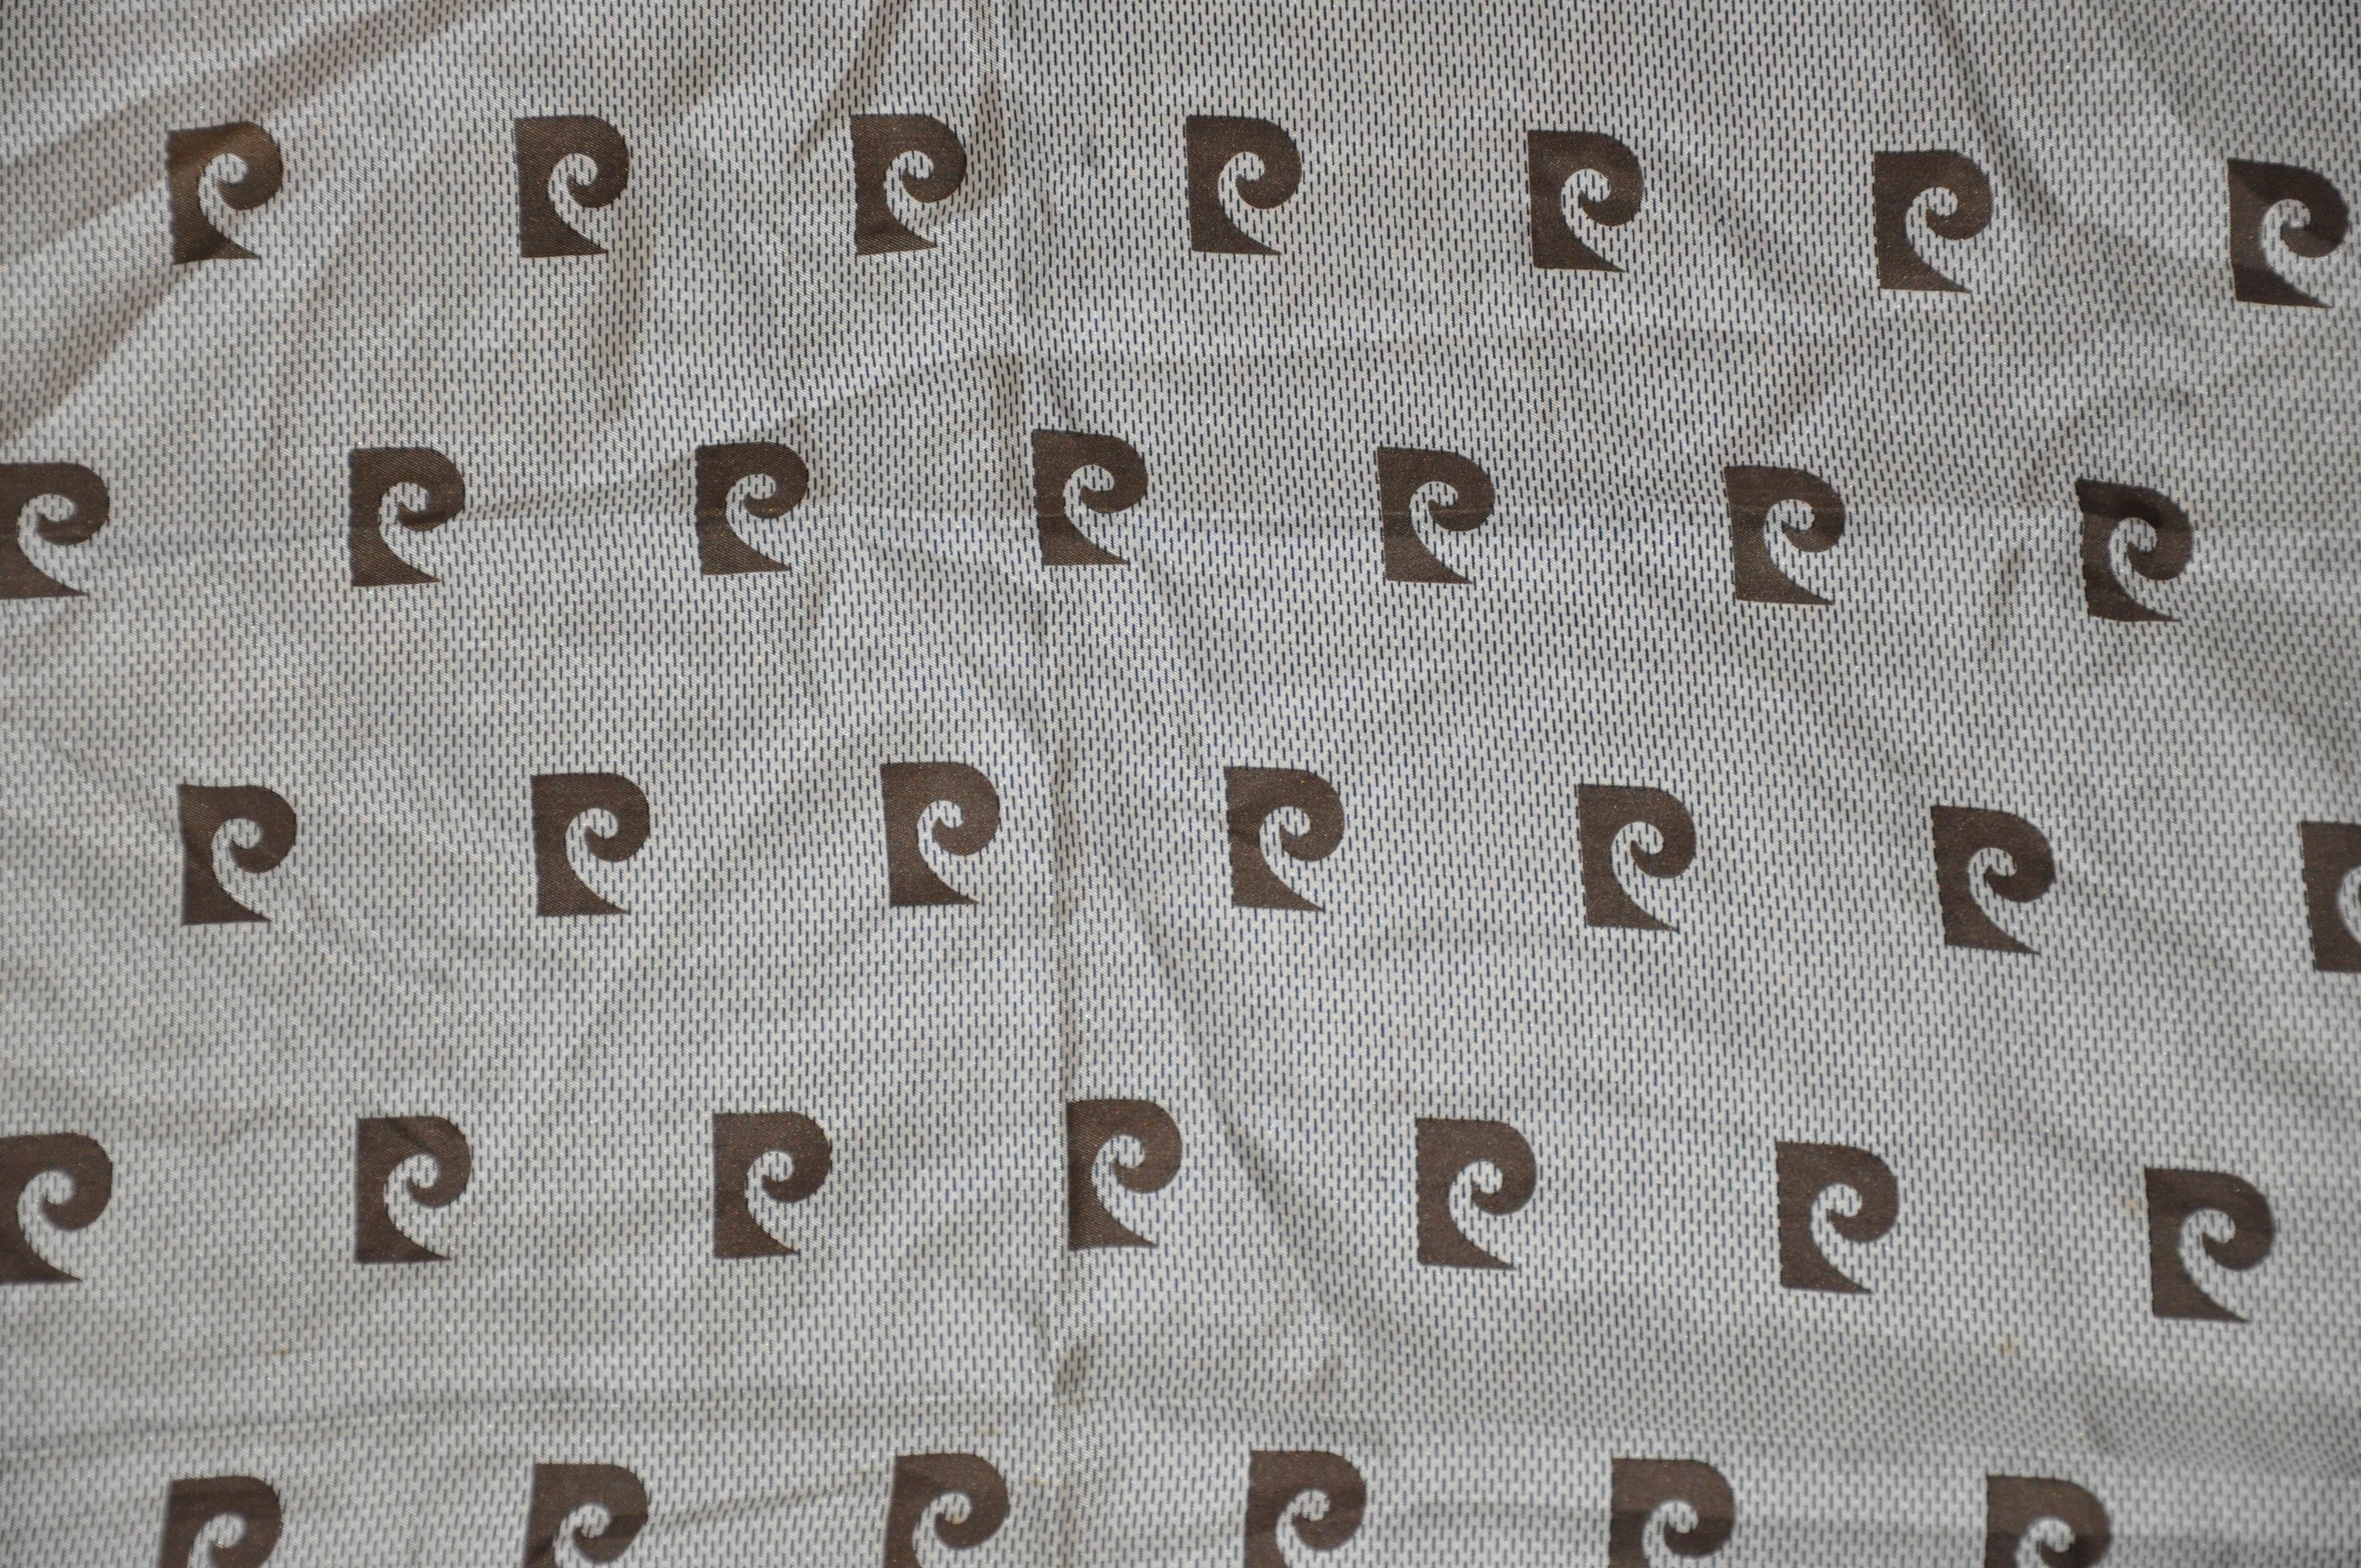      Pierre Cardin wonderful coco brown and ivory signature logo silk scarf with hand-rolled edges, measures 25 inches by 25 and a half inches. Made in France.
